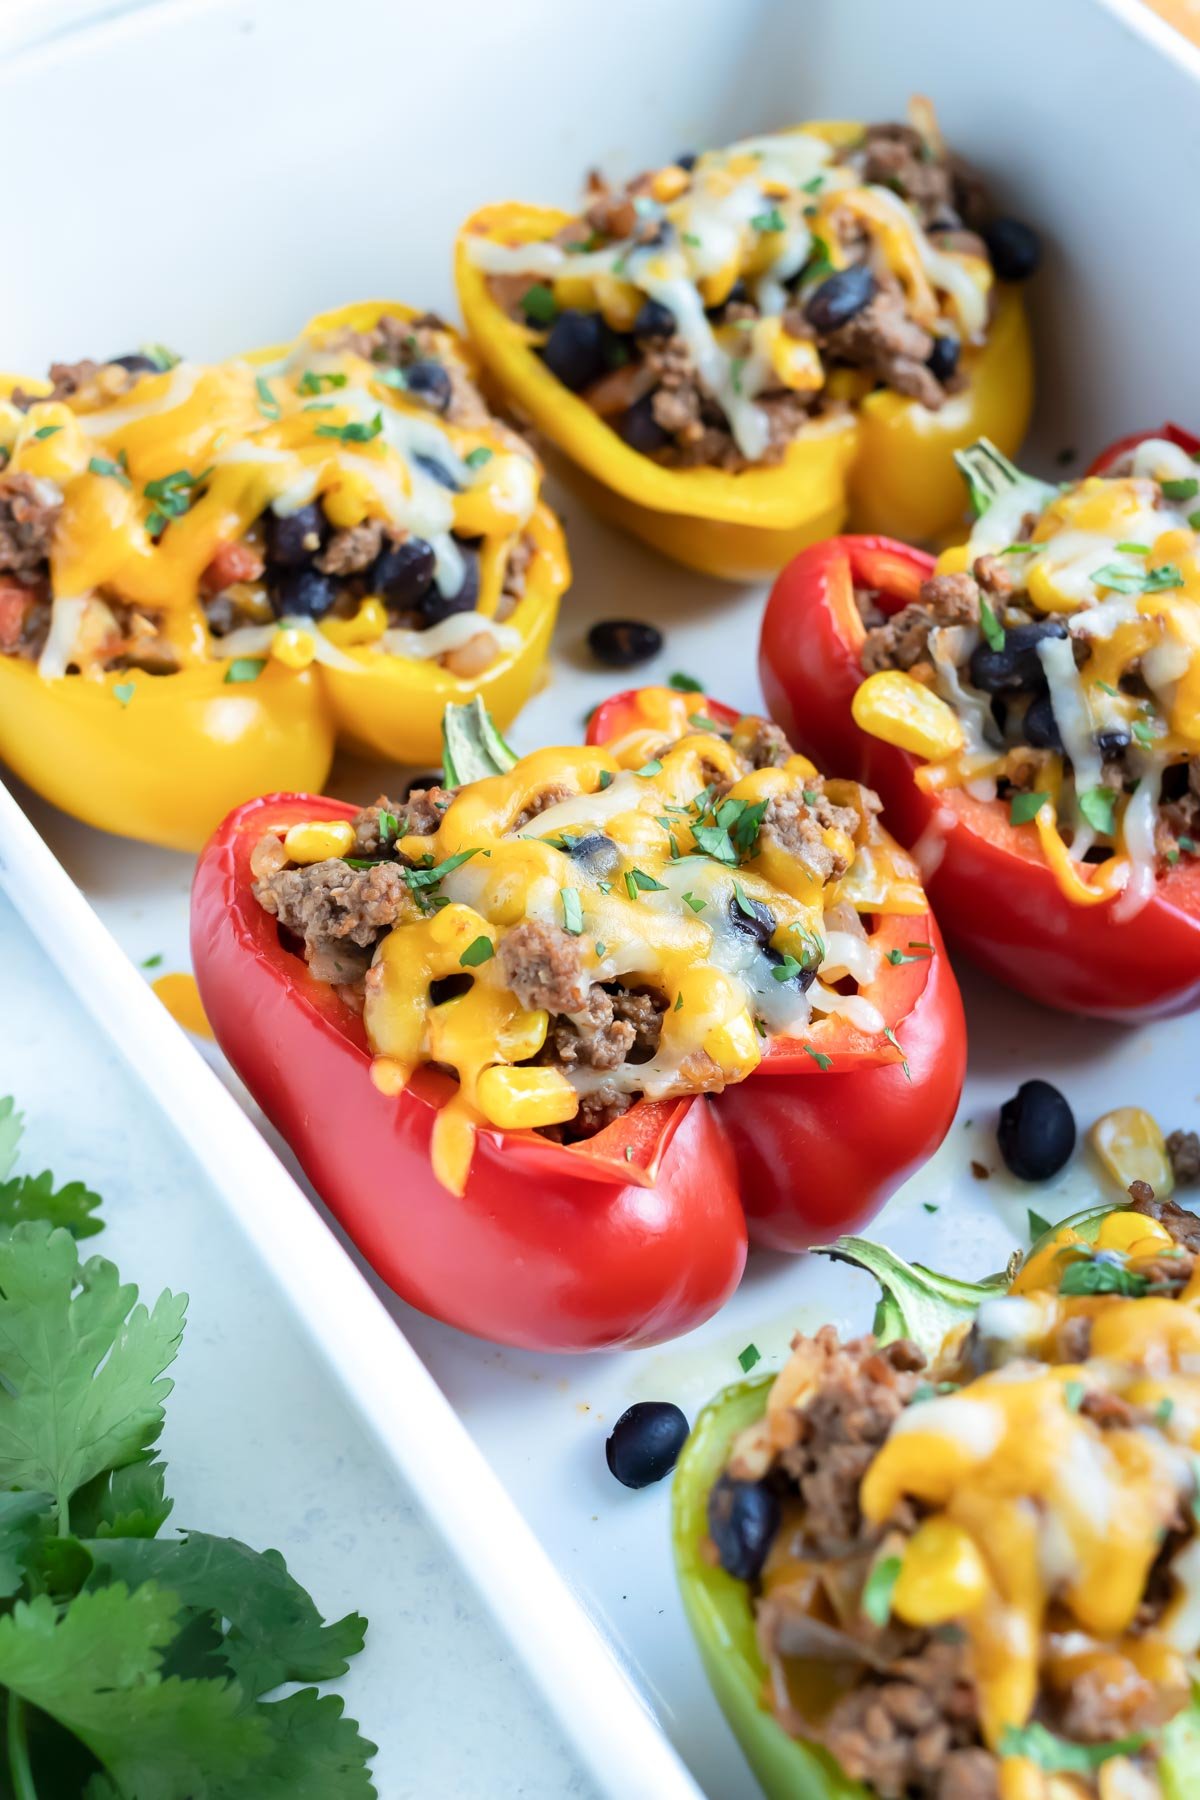 Keto-friendly stuffed bell peppers are served after being baked in the oven.